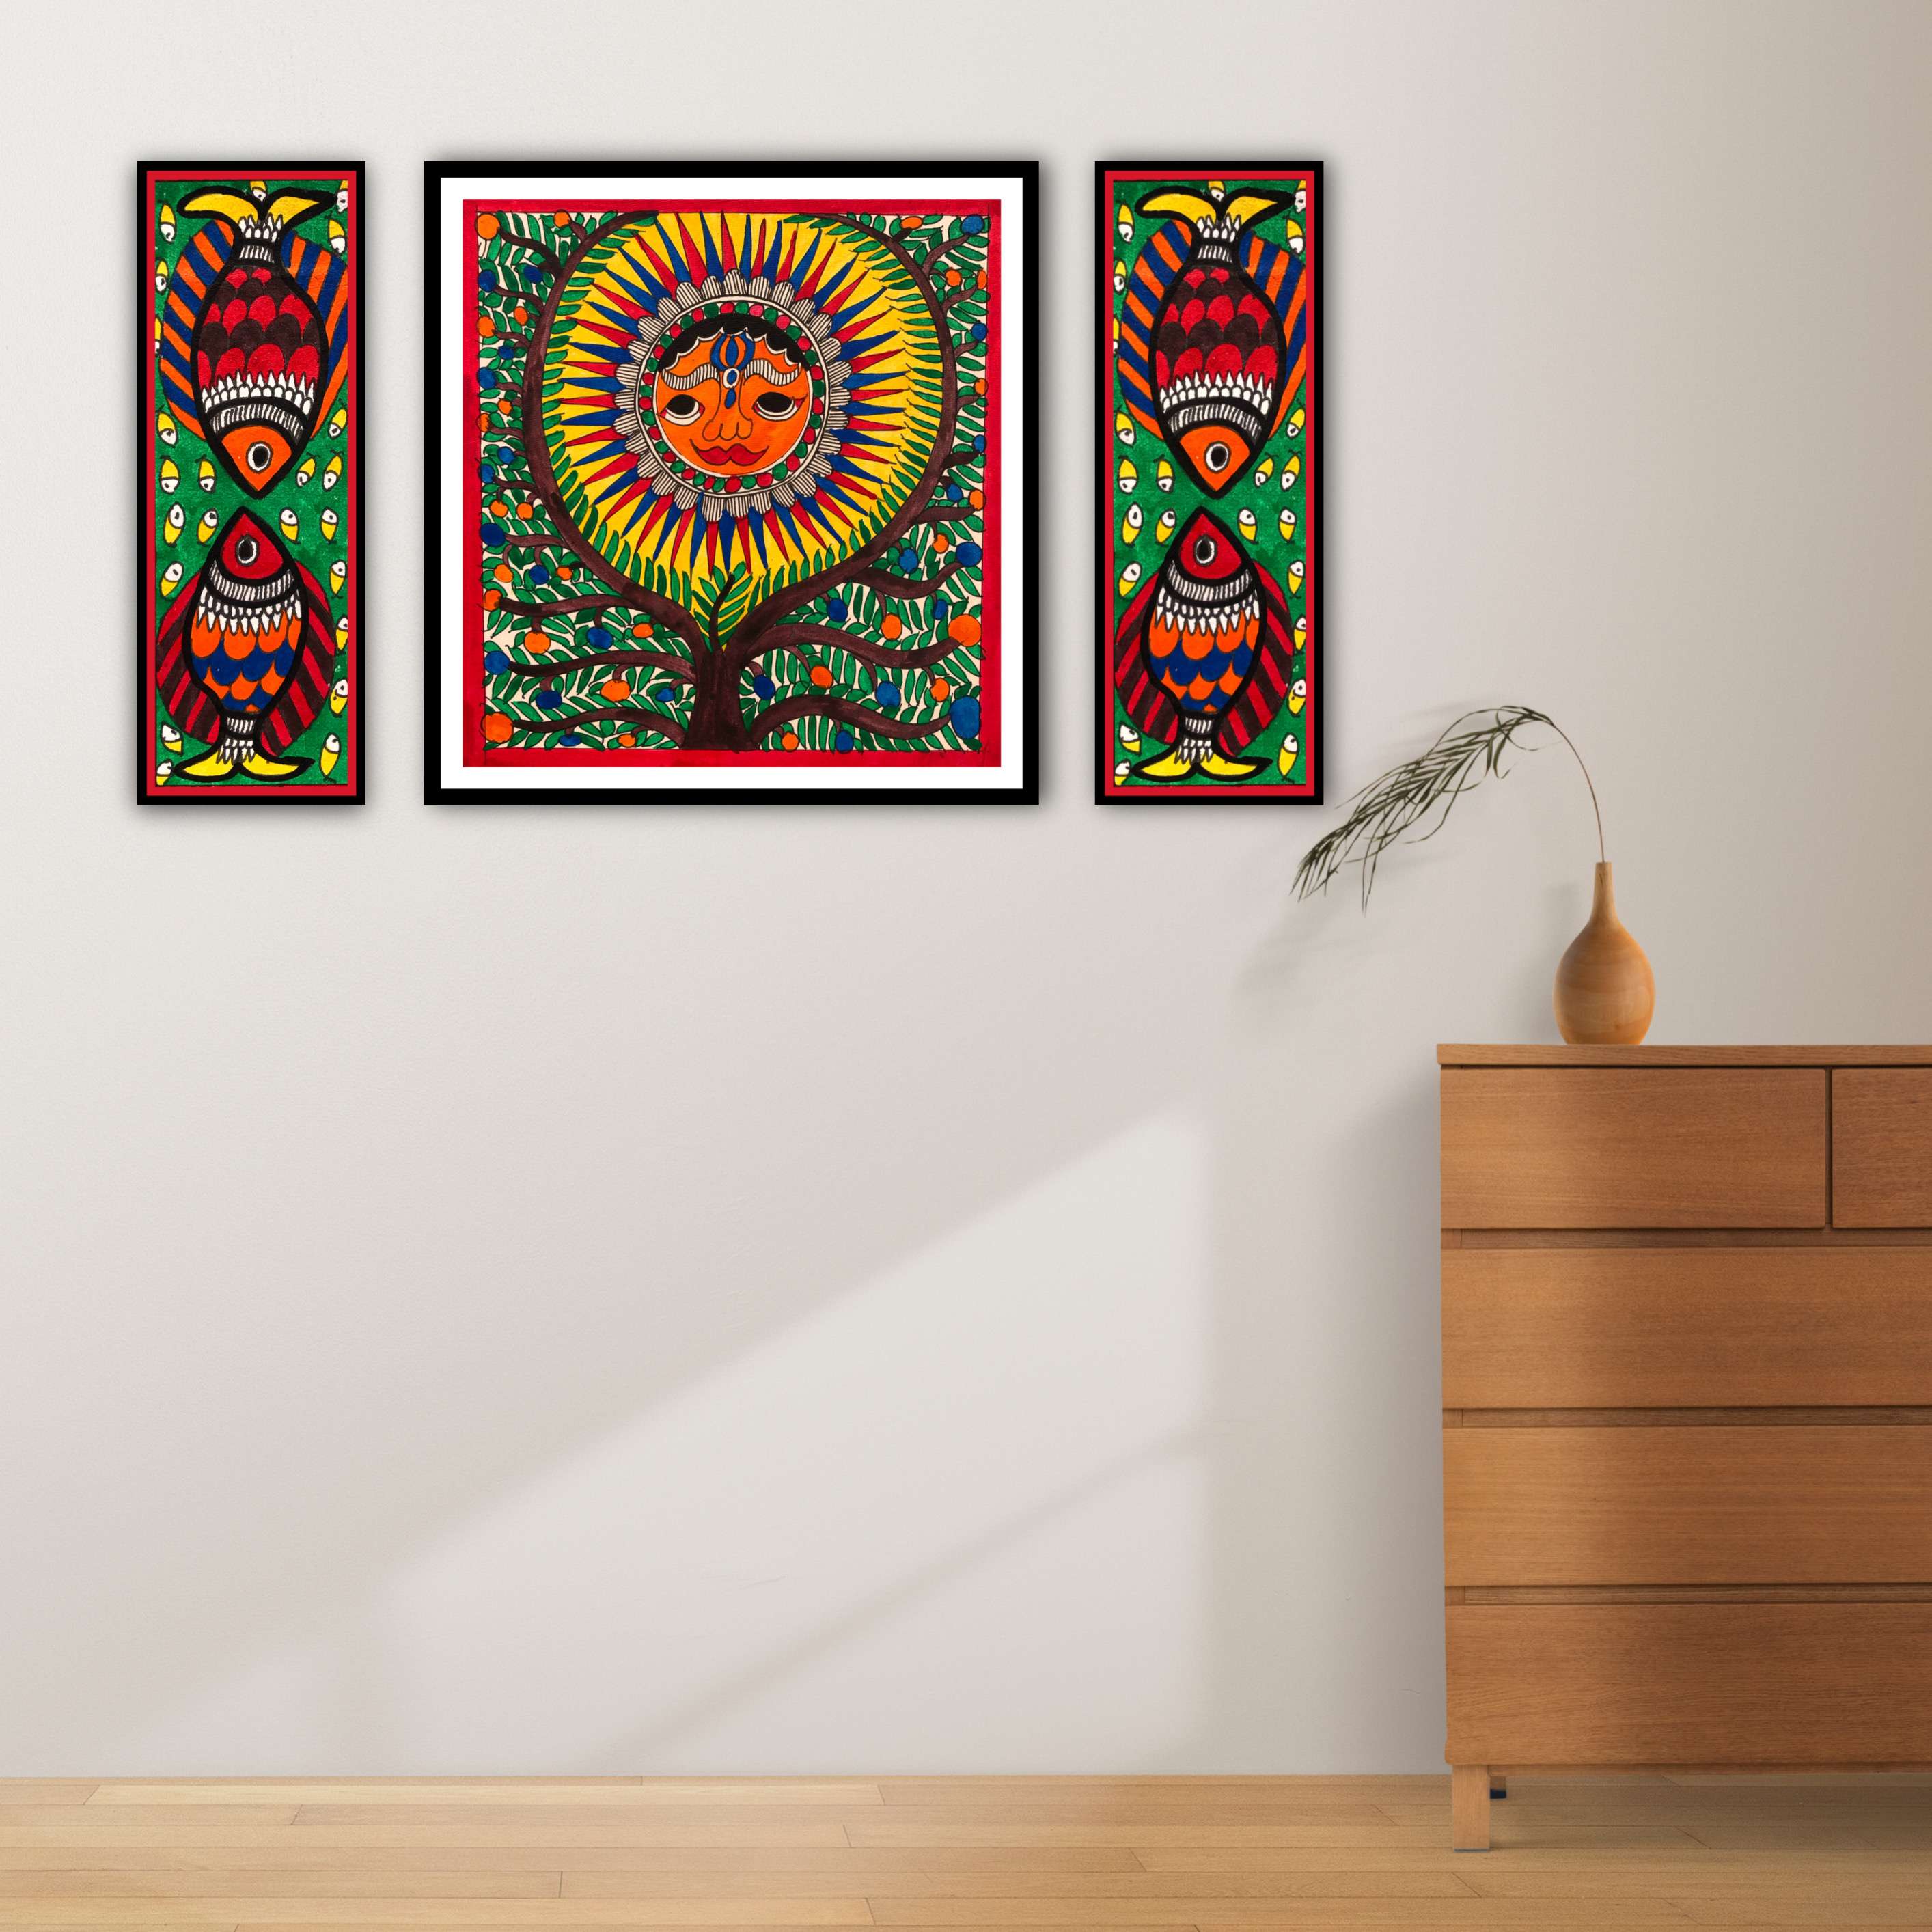 Framed Set of 3 Madhubani paintings for Home & Office Wall Art Decor | Original Handmade Painting By Artdarshan